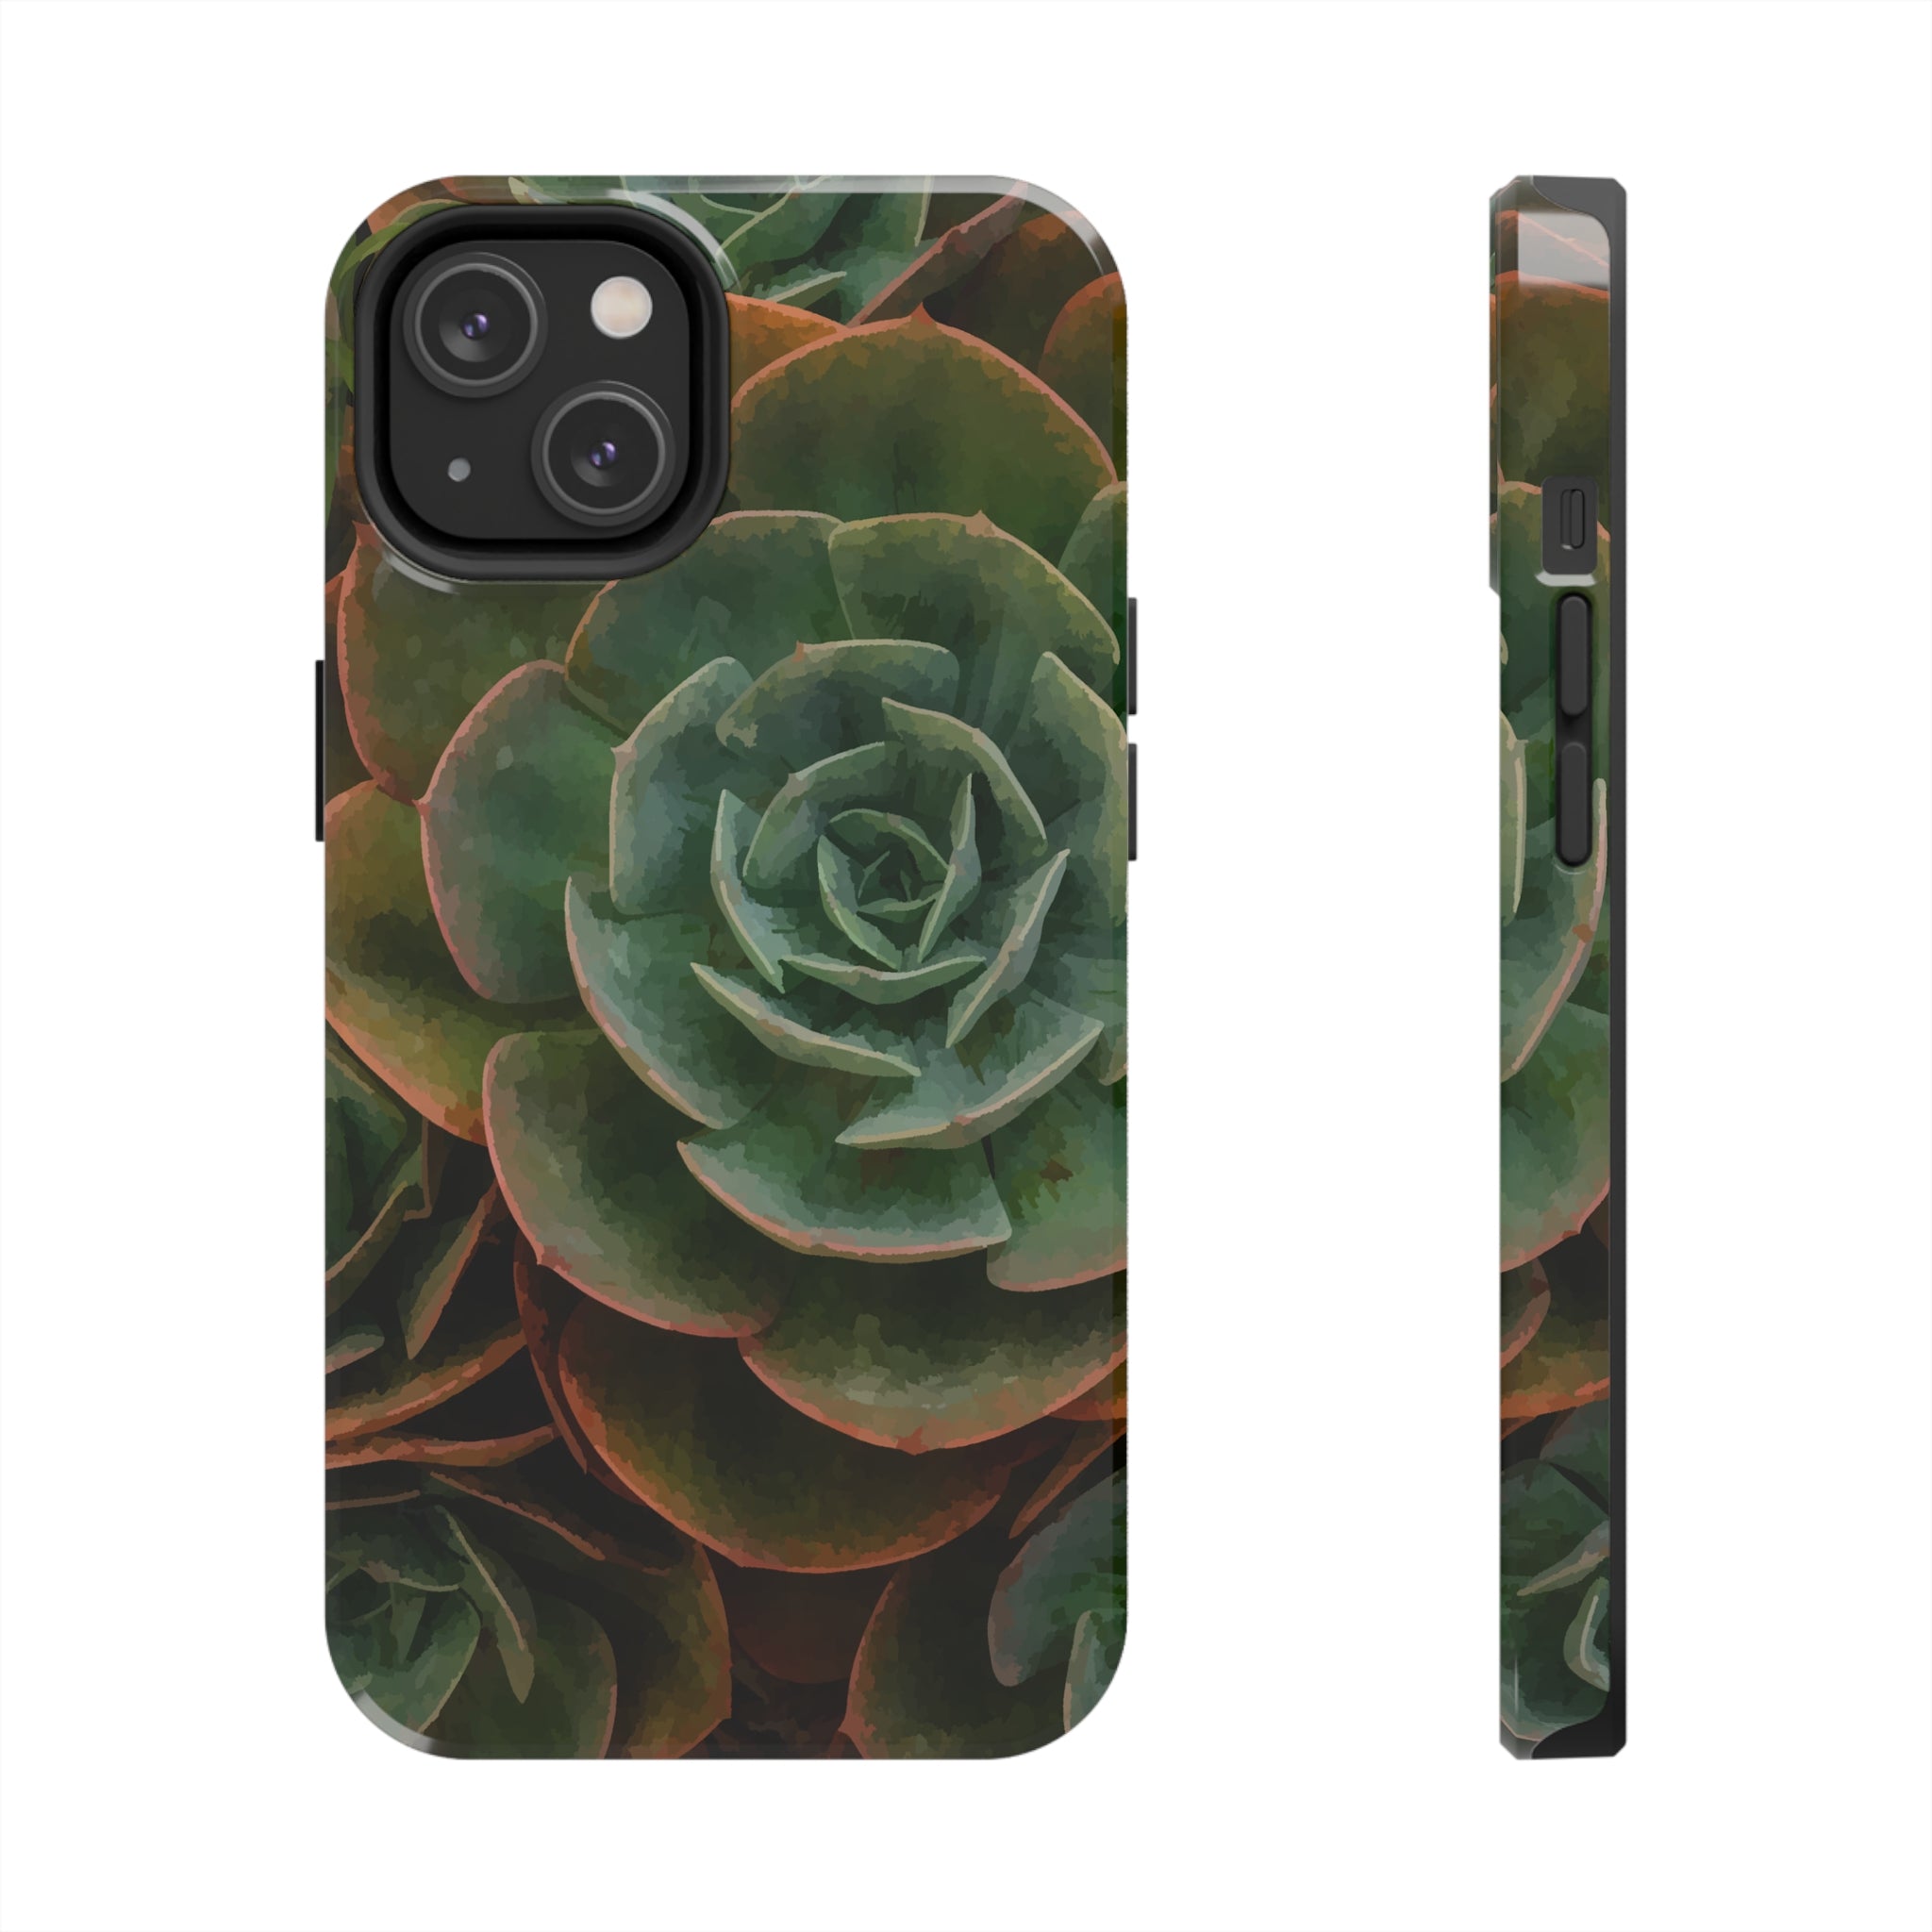 Main image of Succulent Beauty iPhone Case